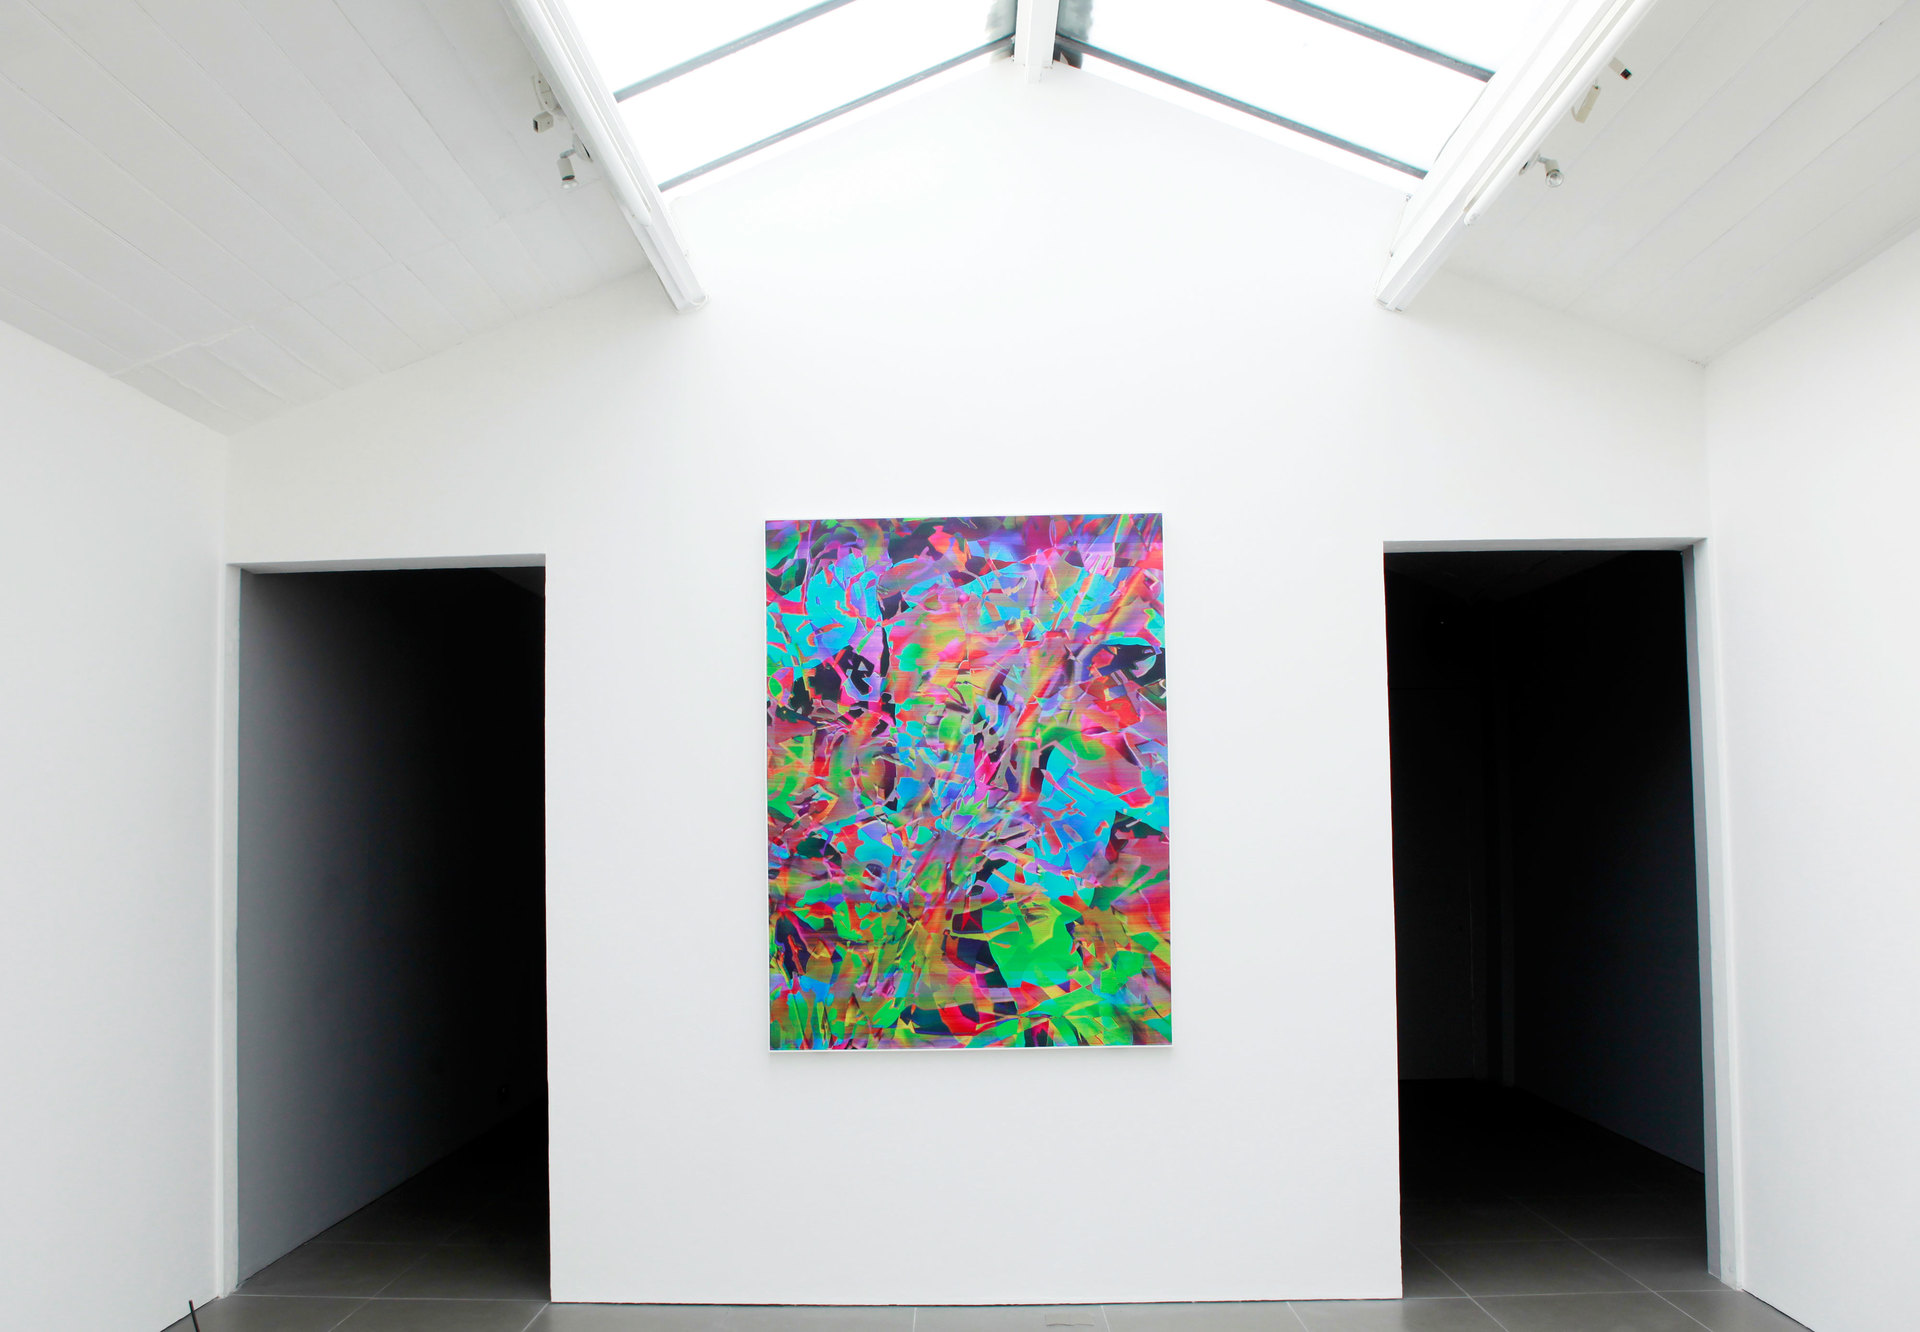 Travess Smalley, Alta Dark, 2012, 173 x 140 cm, Digital print on silk, Cell Project Space